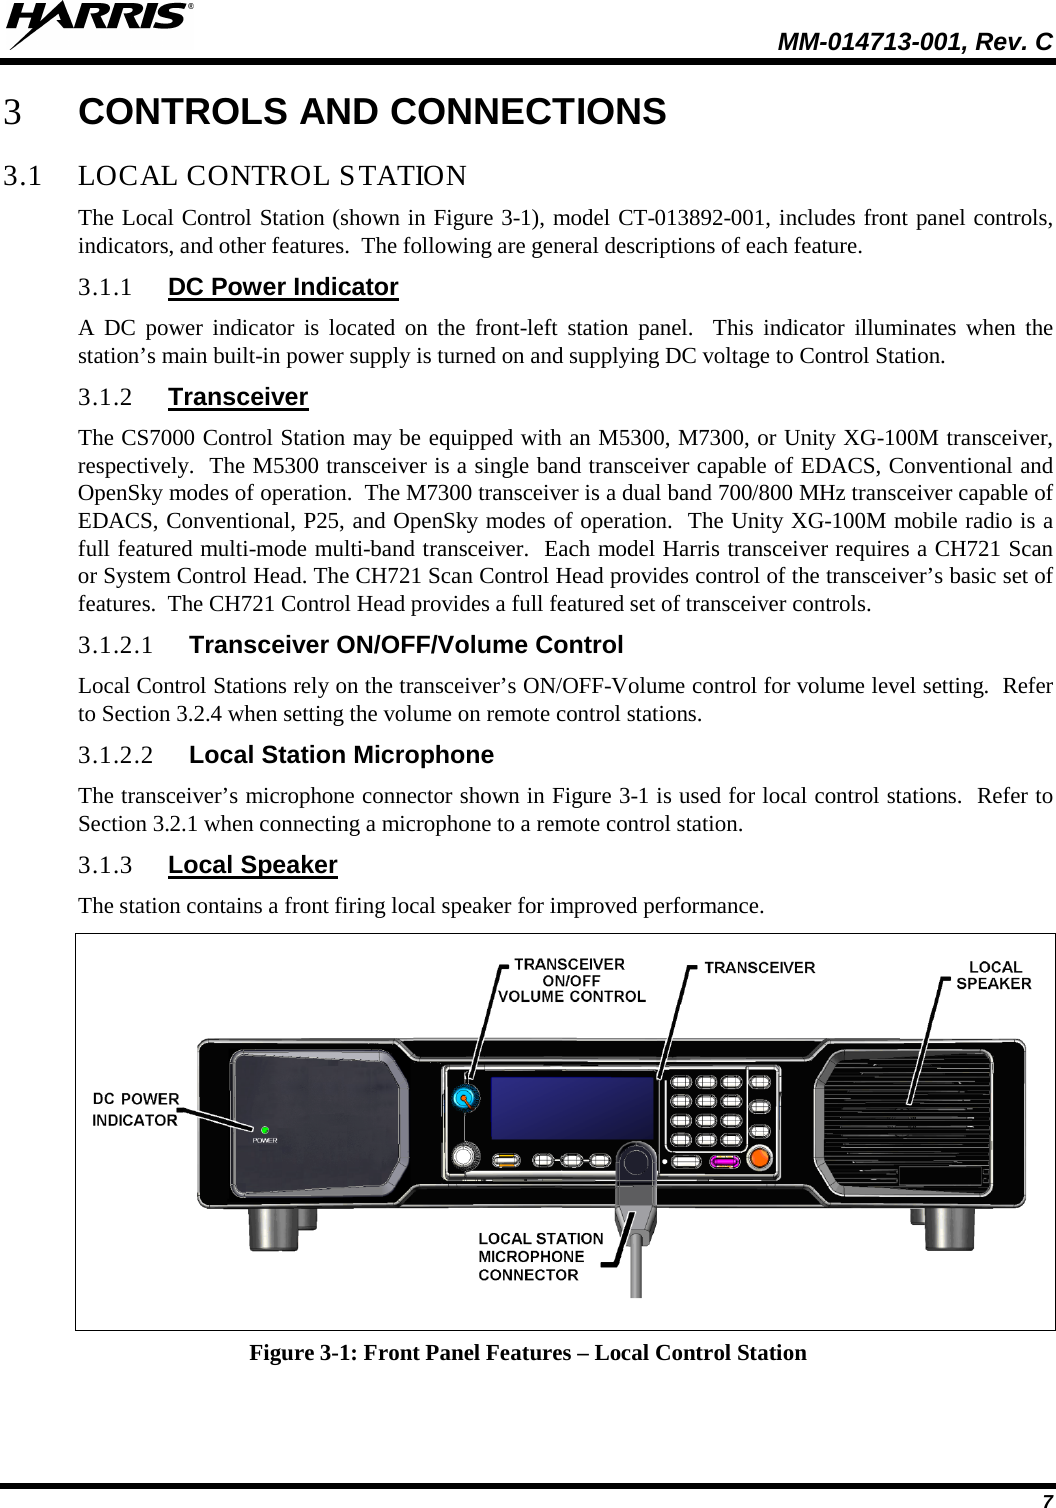  MM-014713-001, Rev. C   7 3 CONTROLS AND CONNECTIONS 3.1 LOCAL CONTROL STATION The Local Control Station (shown in Figure 3-1), model CT-013892-001, includes front panel controls, indicators, and other features.  The following are general descriptions of each feature. 3.1.1 DC Power Indicator A DC power indicator is located on the front-left station panel.  This indicator illuminates when the station’s main built-in power supply is turned on and supplying DC voltage to Control Station. 3.1.2 Transceiver The CS7000 Control Station may be equipped with an M5300, M7300, or Unity XG-100M transceiver, respectively.  The M5300 transceiver is a single band transceiver capable of EDACS, Conventional and OpenSky modes of operation.  The M7300 transceiver is a dual band 700/800 MHz transceiver capable of EDACS, Conventional, P25, and OpenSky modes of operation.  The Unity XG-100M mobile radio is a full featured multi-mode multi-band transceiver.  Each model Harris transceiver requires a CH721 Scan or System Control Head. The CH721 Scan Control Head provides control of the transceiver’s basic set of features.  The CH721 Control Head provides a full featured set of transceiver controls.  3.1.2.1 Transceiver ON/OFF/Volume Control Local Control Stations rely on the transceiver’s ON/OFF-Volume control for volume level setting.  Refer to Section 3.2.4 when setting the volume on remote control stations. 3.1.2.2 Local Station Microphone The transceiver’s microphone connector shown in Figure 3-1 is used for local control stations.  Refer to Section 3.2.1 when connecting a microphone to a remote control station. 3.1.3 Local Speaker The station contains a front firing local speaker for improved performance.  Figure 3-1: Front Panel Features – Local Control Station 